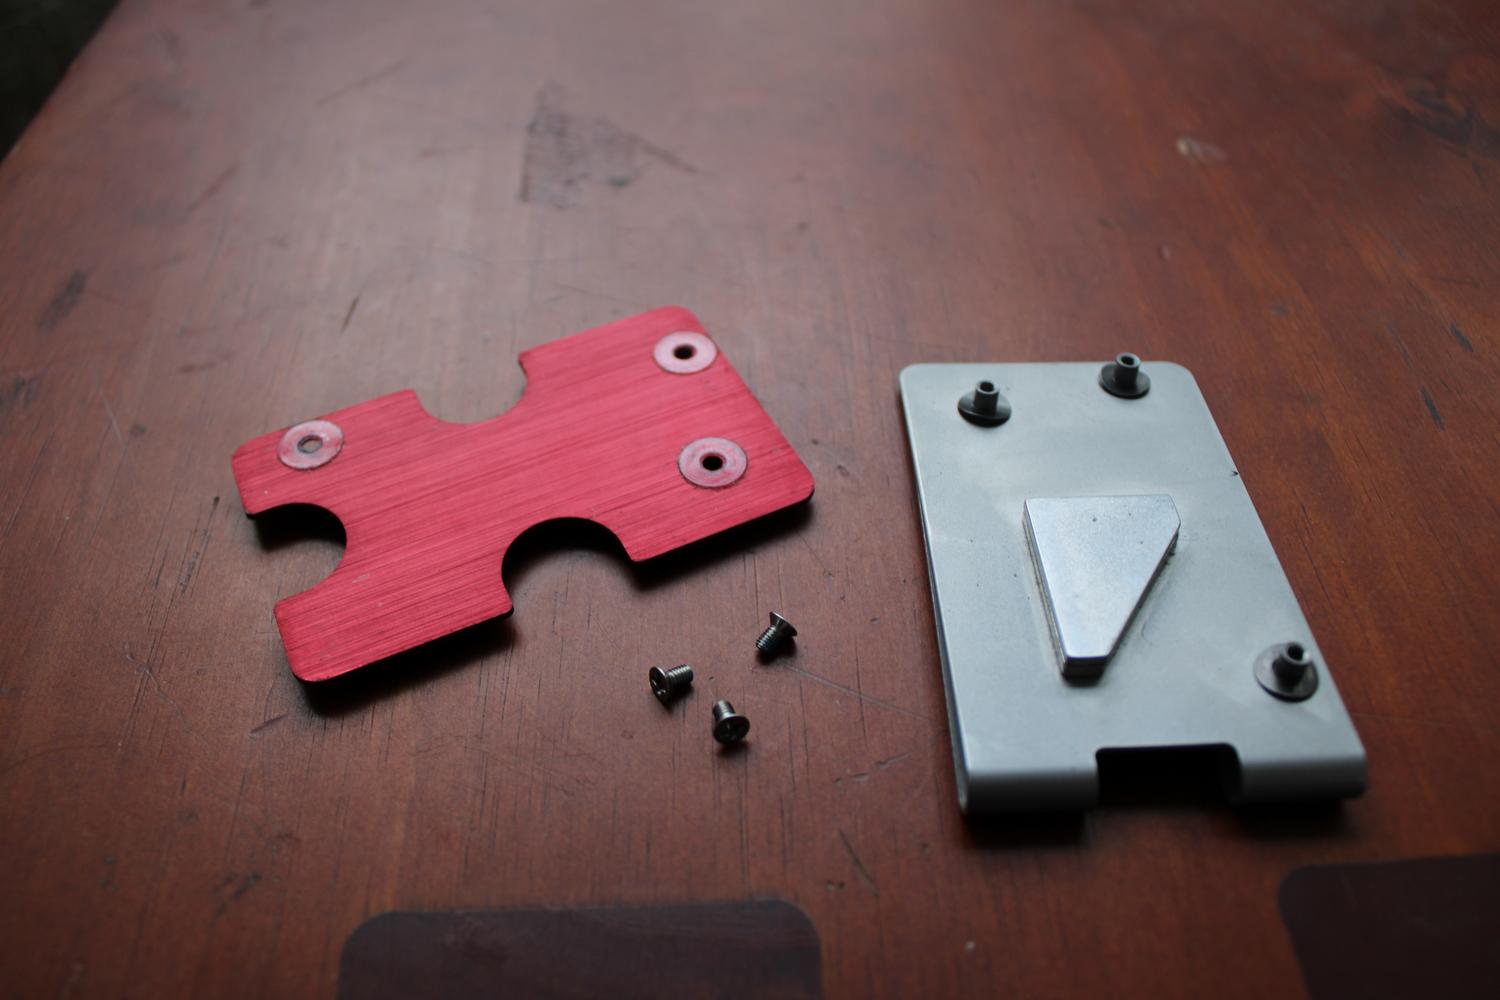 A close up photo of a table surface containing a metal device that has been unscrewed. The base plate is on the right with three little stands to provide room in between itself and the top plate. The idea is that the cards sit in between the gap. The top plate is red and sitting to the left of the base plate with three small screws sitting just below it.